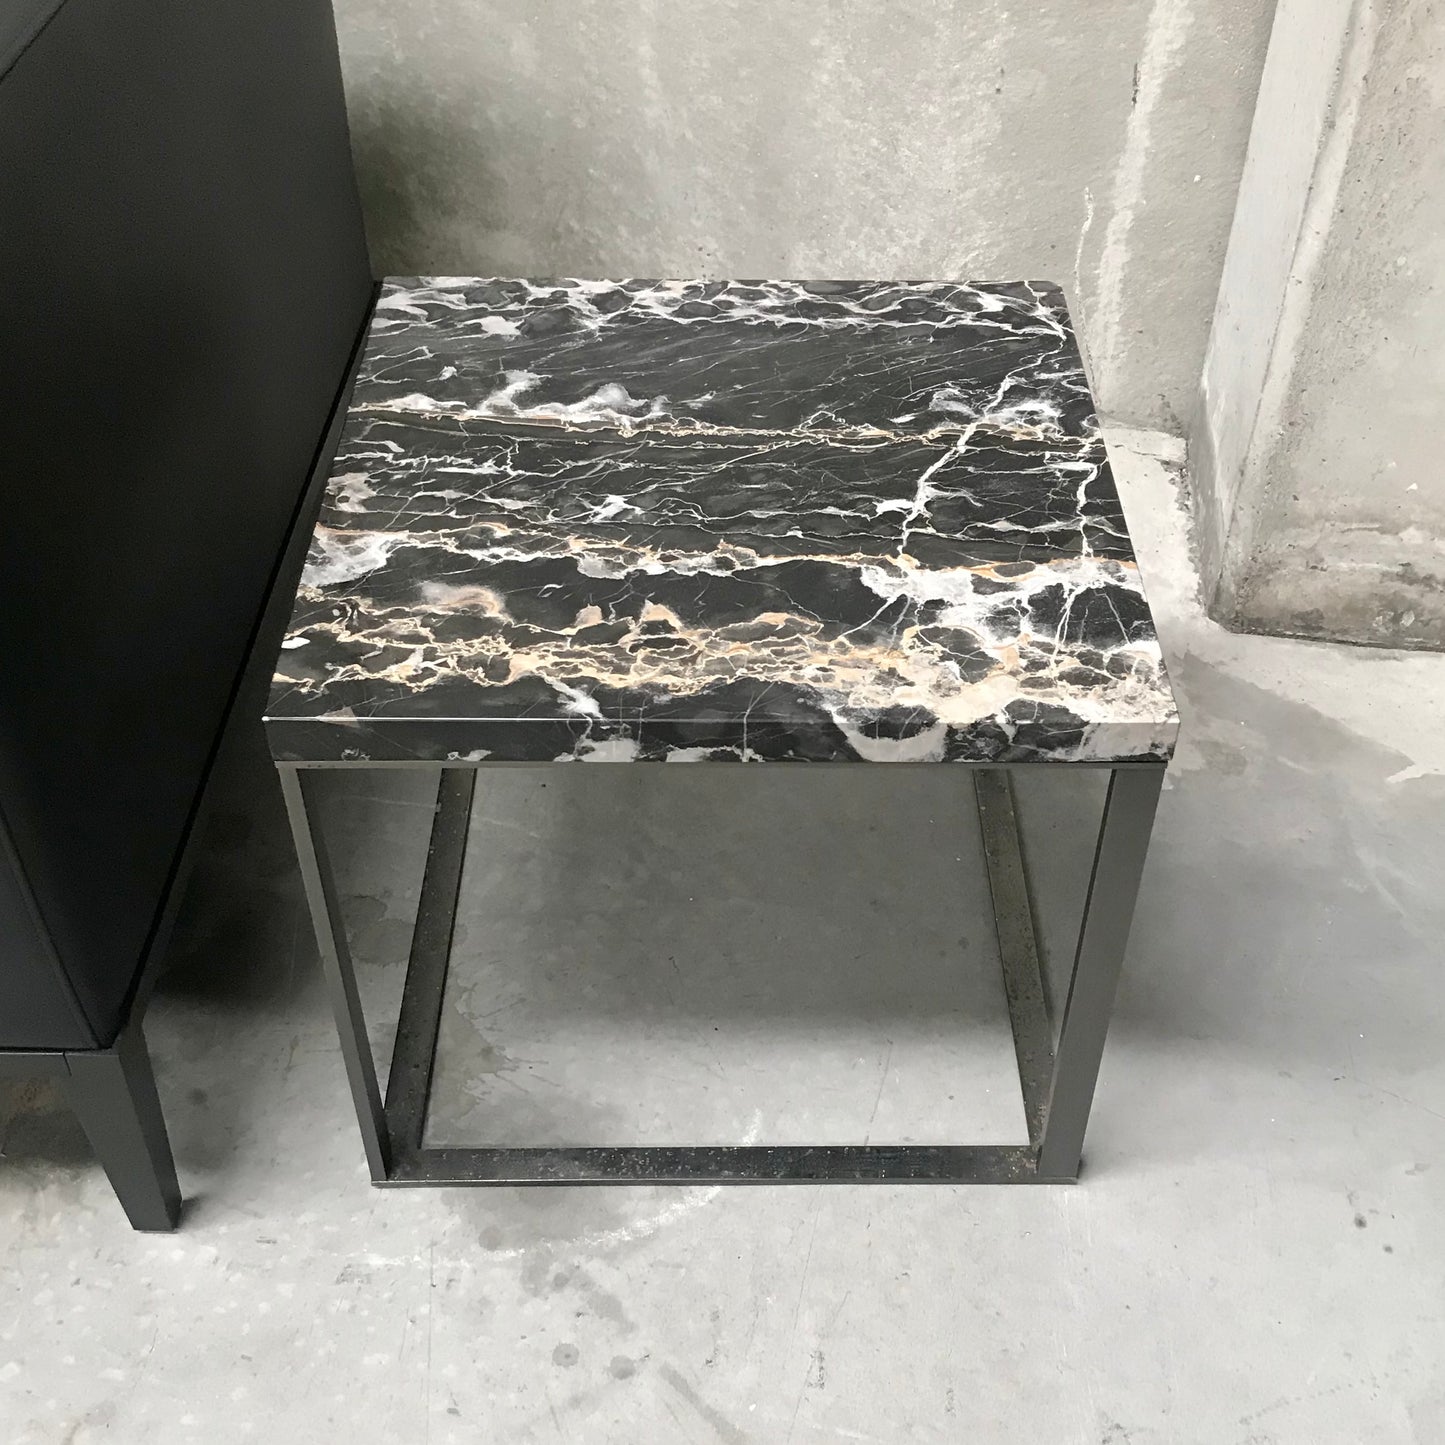 Lithos Side Table by Antonio Citterio for Maxalto (2 Available)